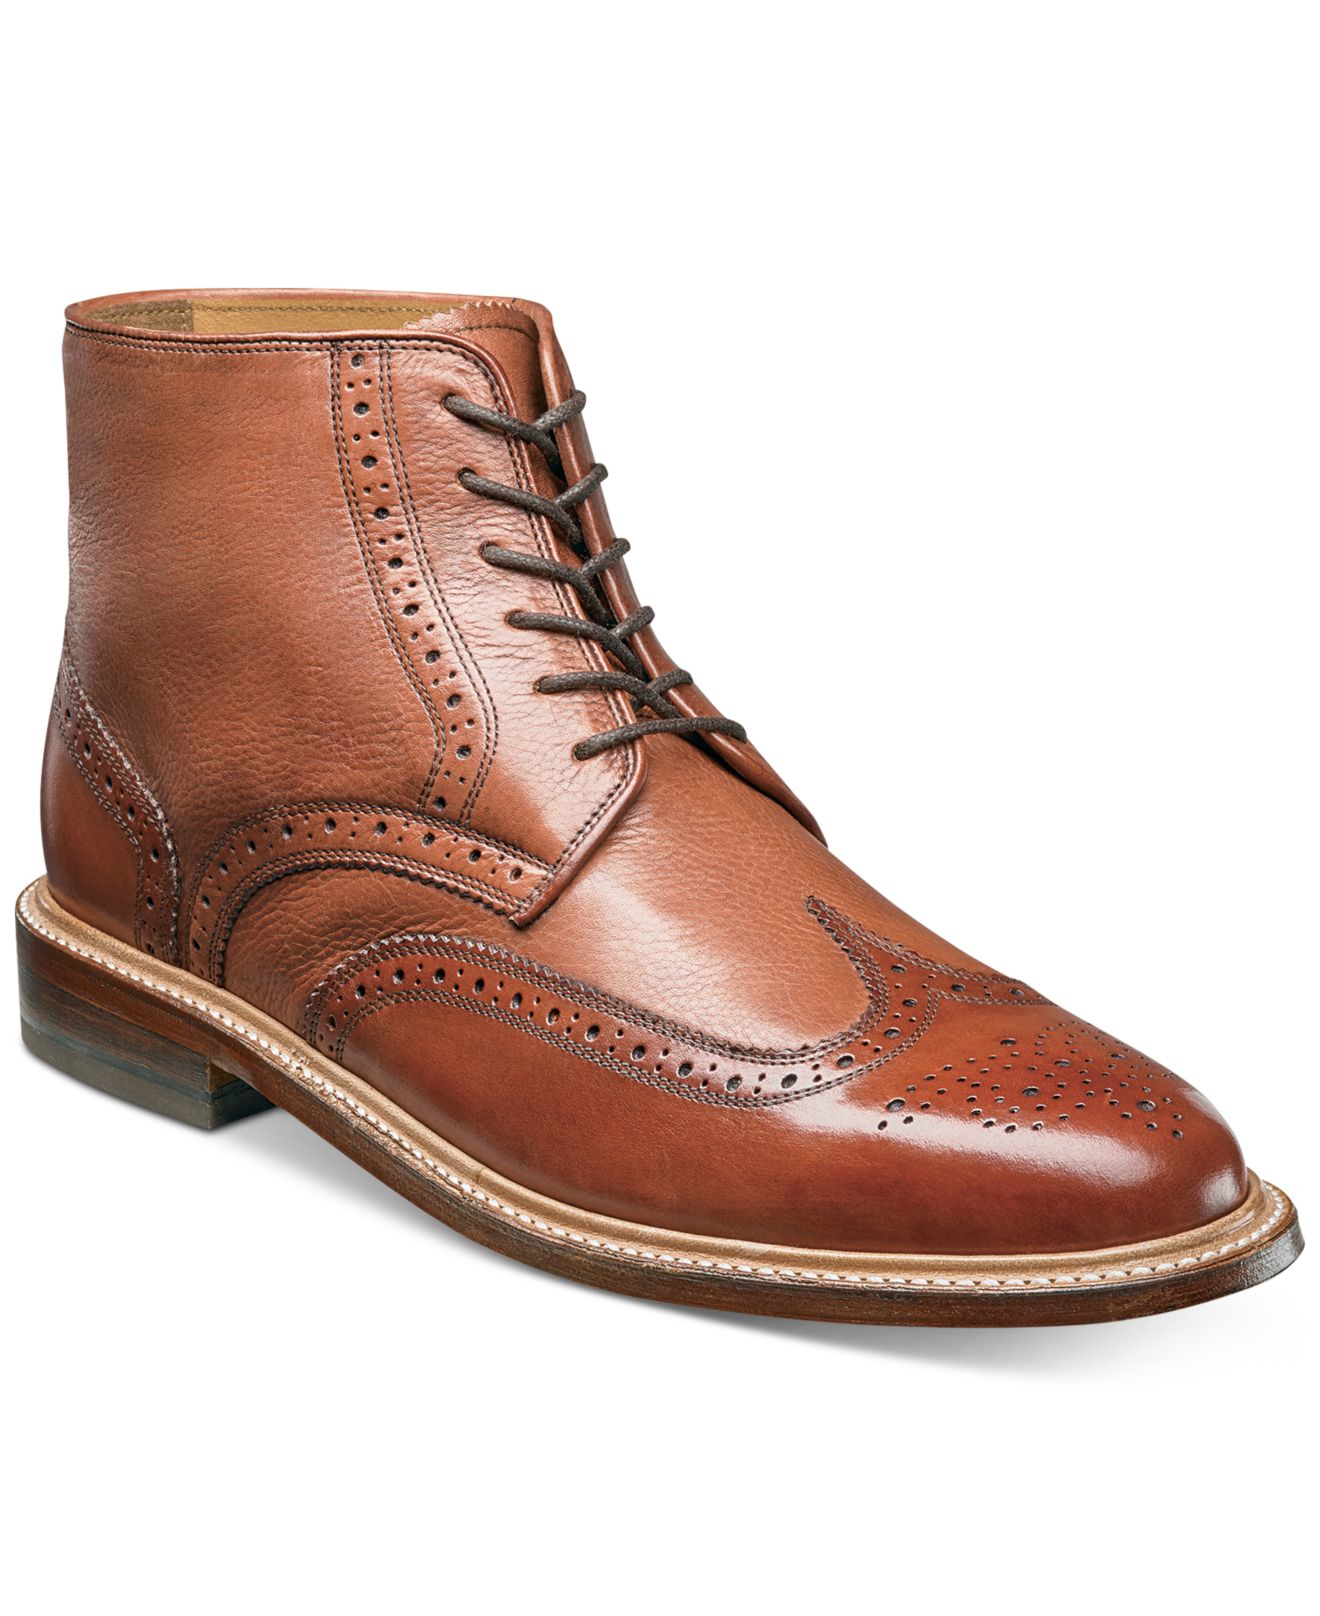 Florsheim Leather Heritage Wingtip Boots in Brown for Men - Lyst